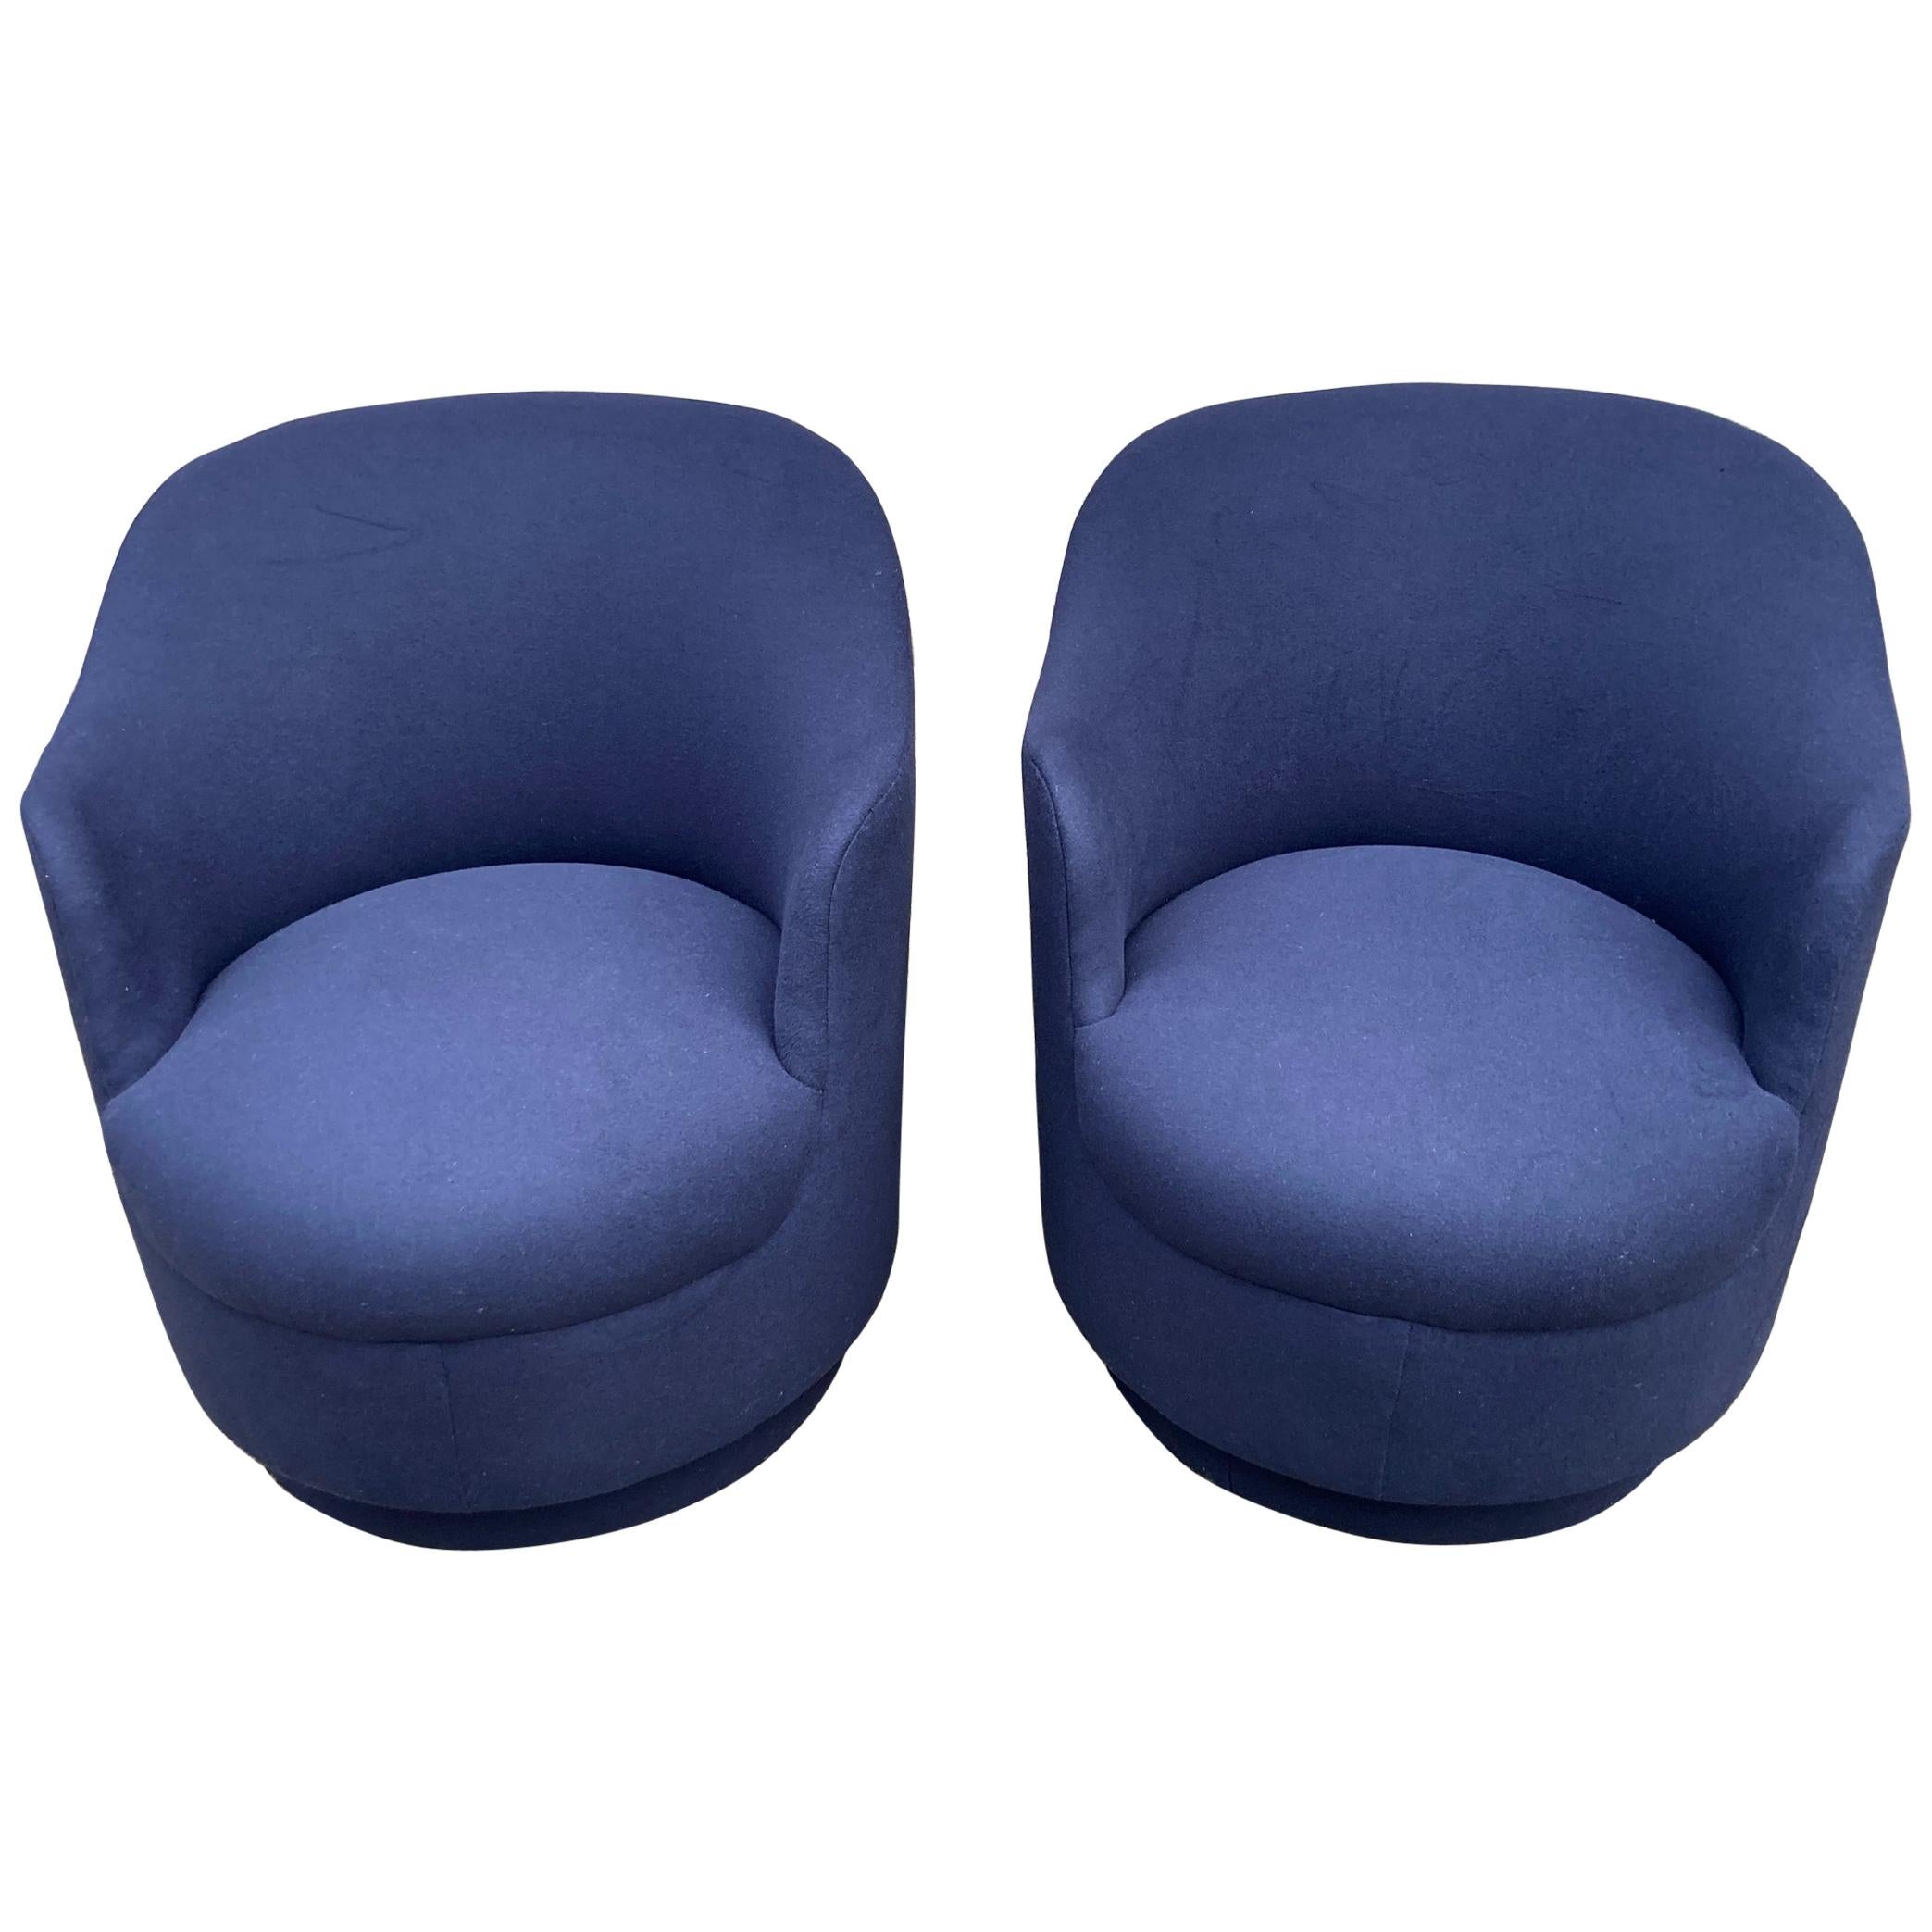 Pair of Navy Blue Upholstered Swivel Chairs Attributed to Milo Baughman